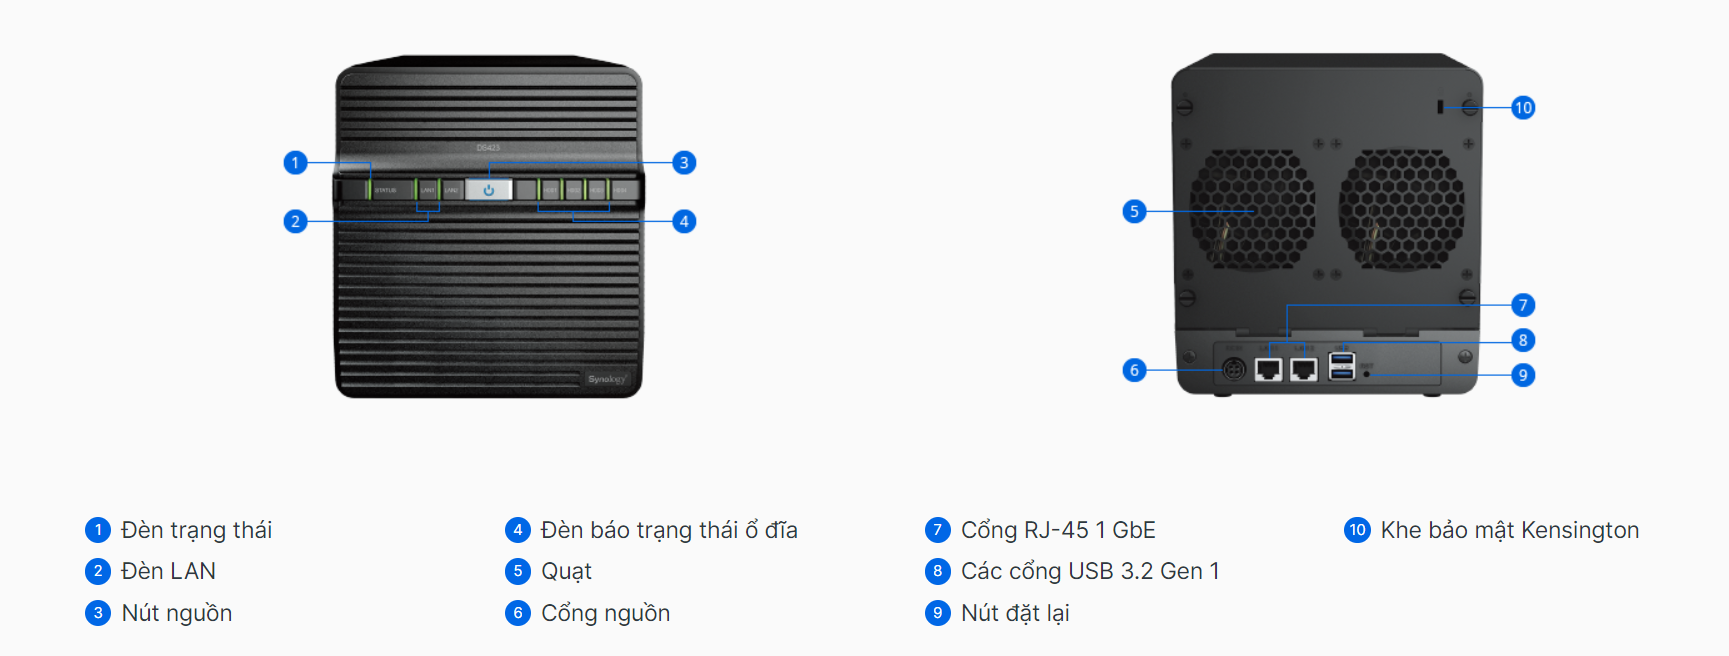 Thiết kế của NAS Synology DS423